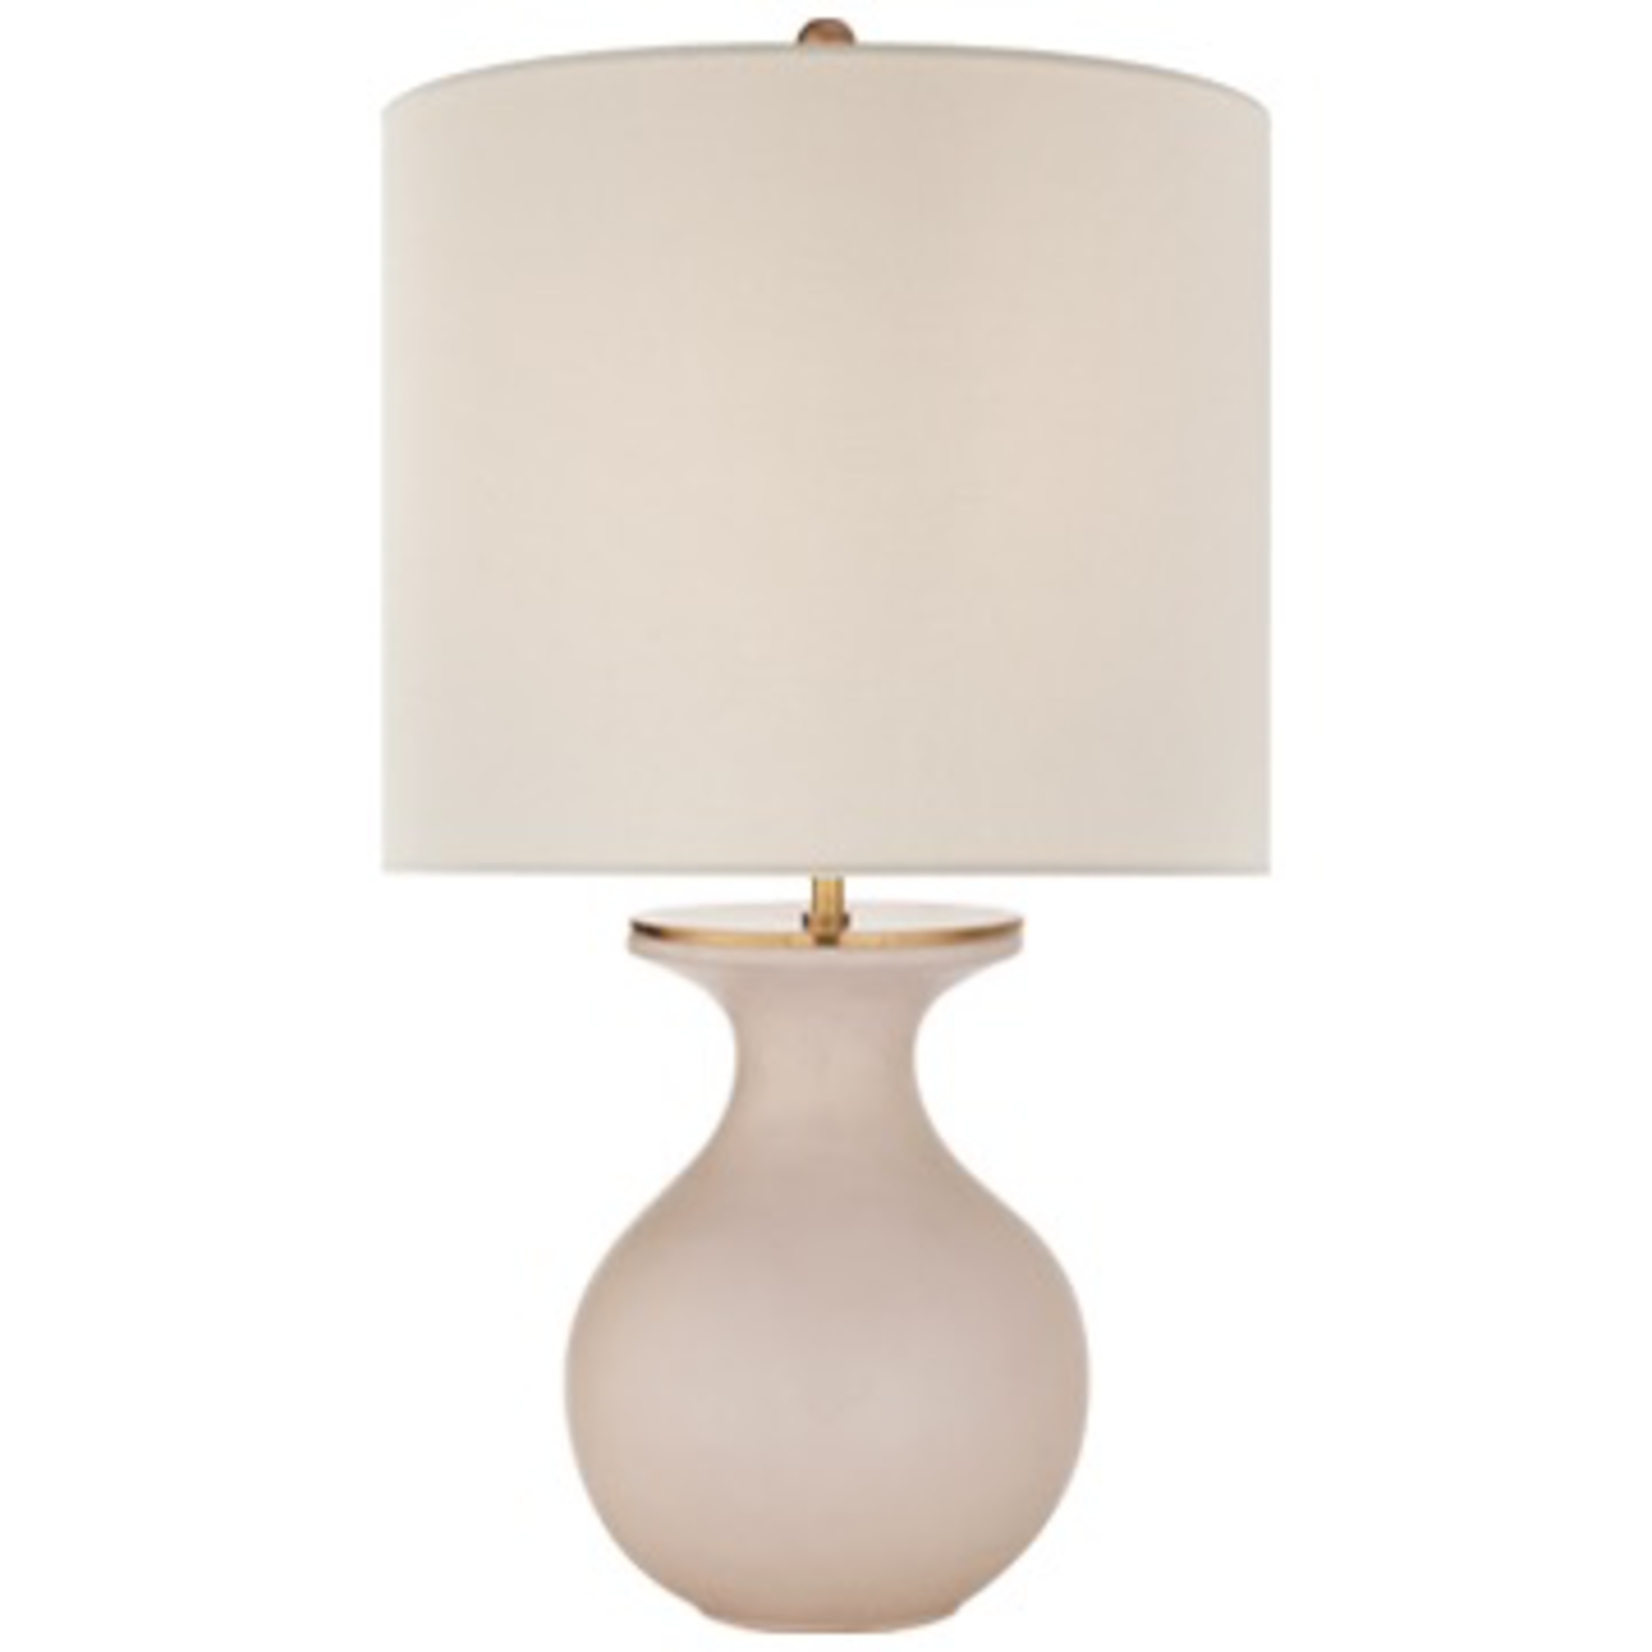 Visual Comfort Albie Small Desk Lamp in Blush with Cream Linen Shade